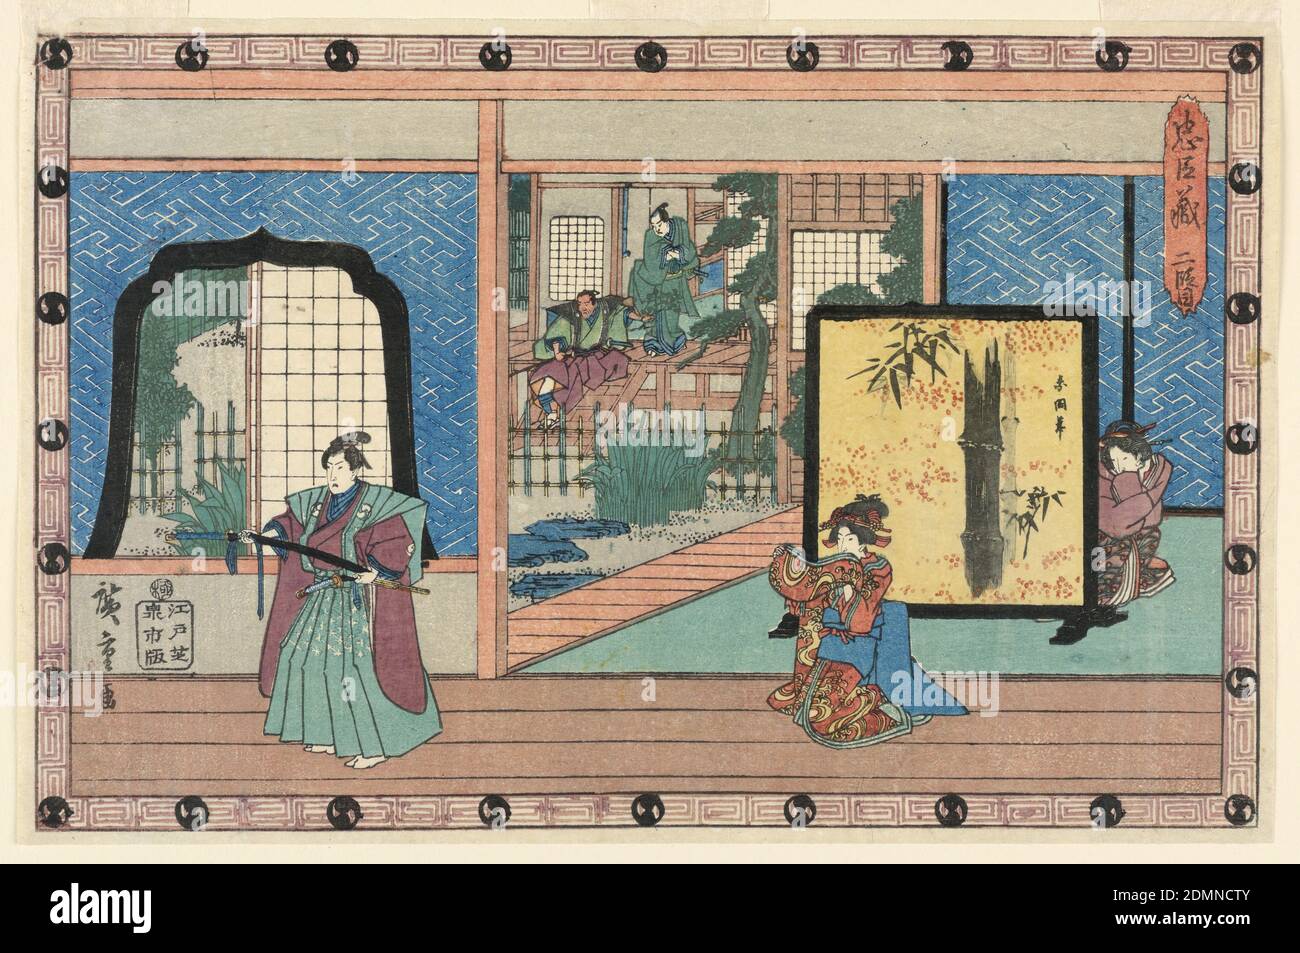 Stage Design: Act II, for the Chushingura, Ando Hiroshige, Japanese, 1797–1858, Senichi, Woodblock print (ukiyo-e) on mulberry paper (washi), ink with color, Horizontal format. A stage set shows the interior of a house, with the figure of a samurai and kneeling woman. In the right middle distance, a woman kneels behind a painted screen. Garden with two figures on a porch, left background. Title, upper right. Border composed of motifs of actors' seals (tomo-e crests)., Japan, 1836, theater, Print Stock Photo